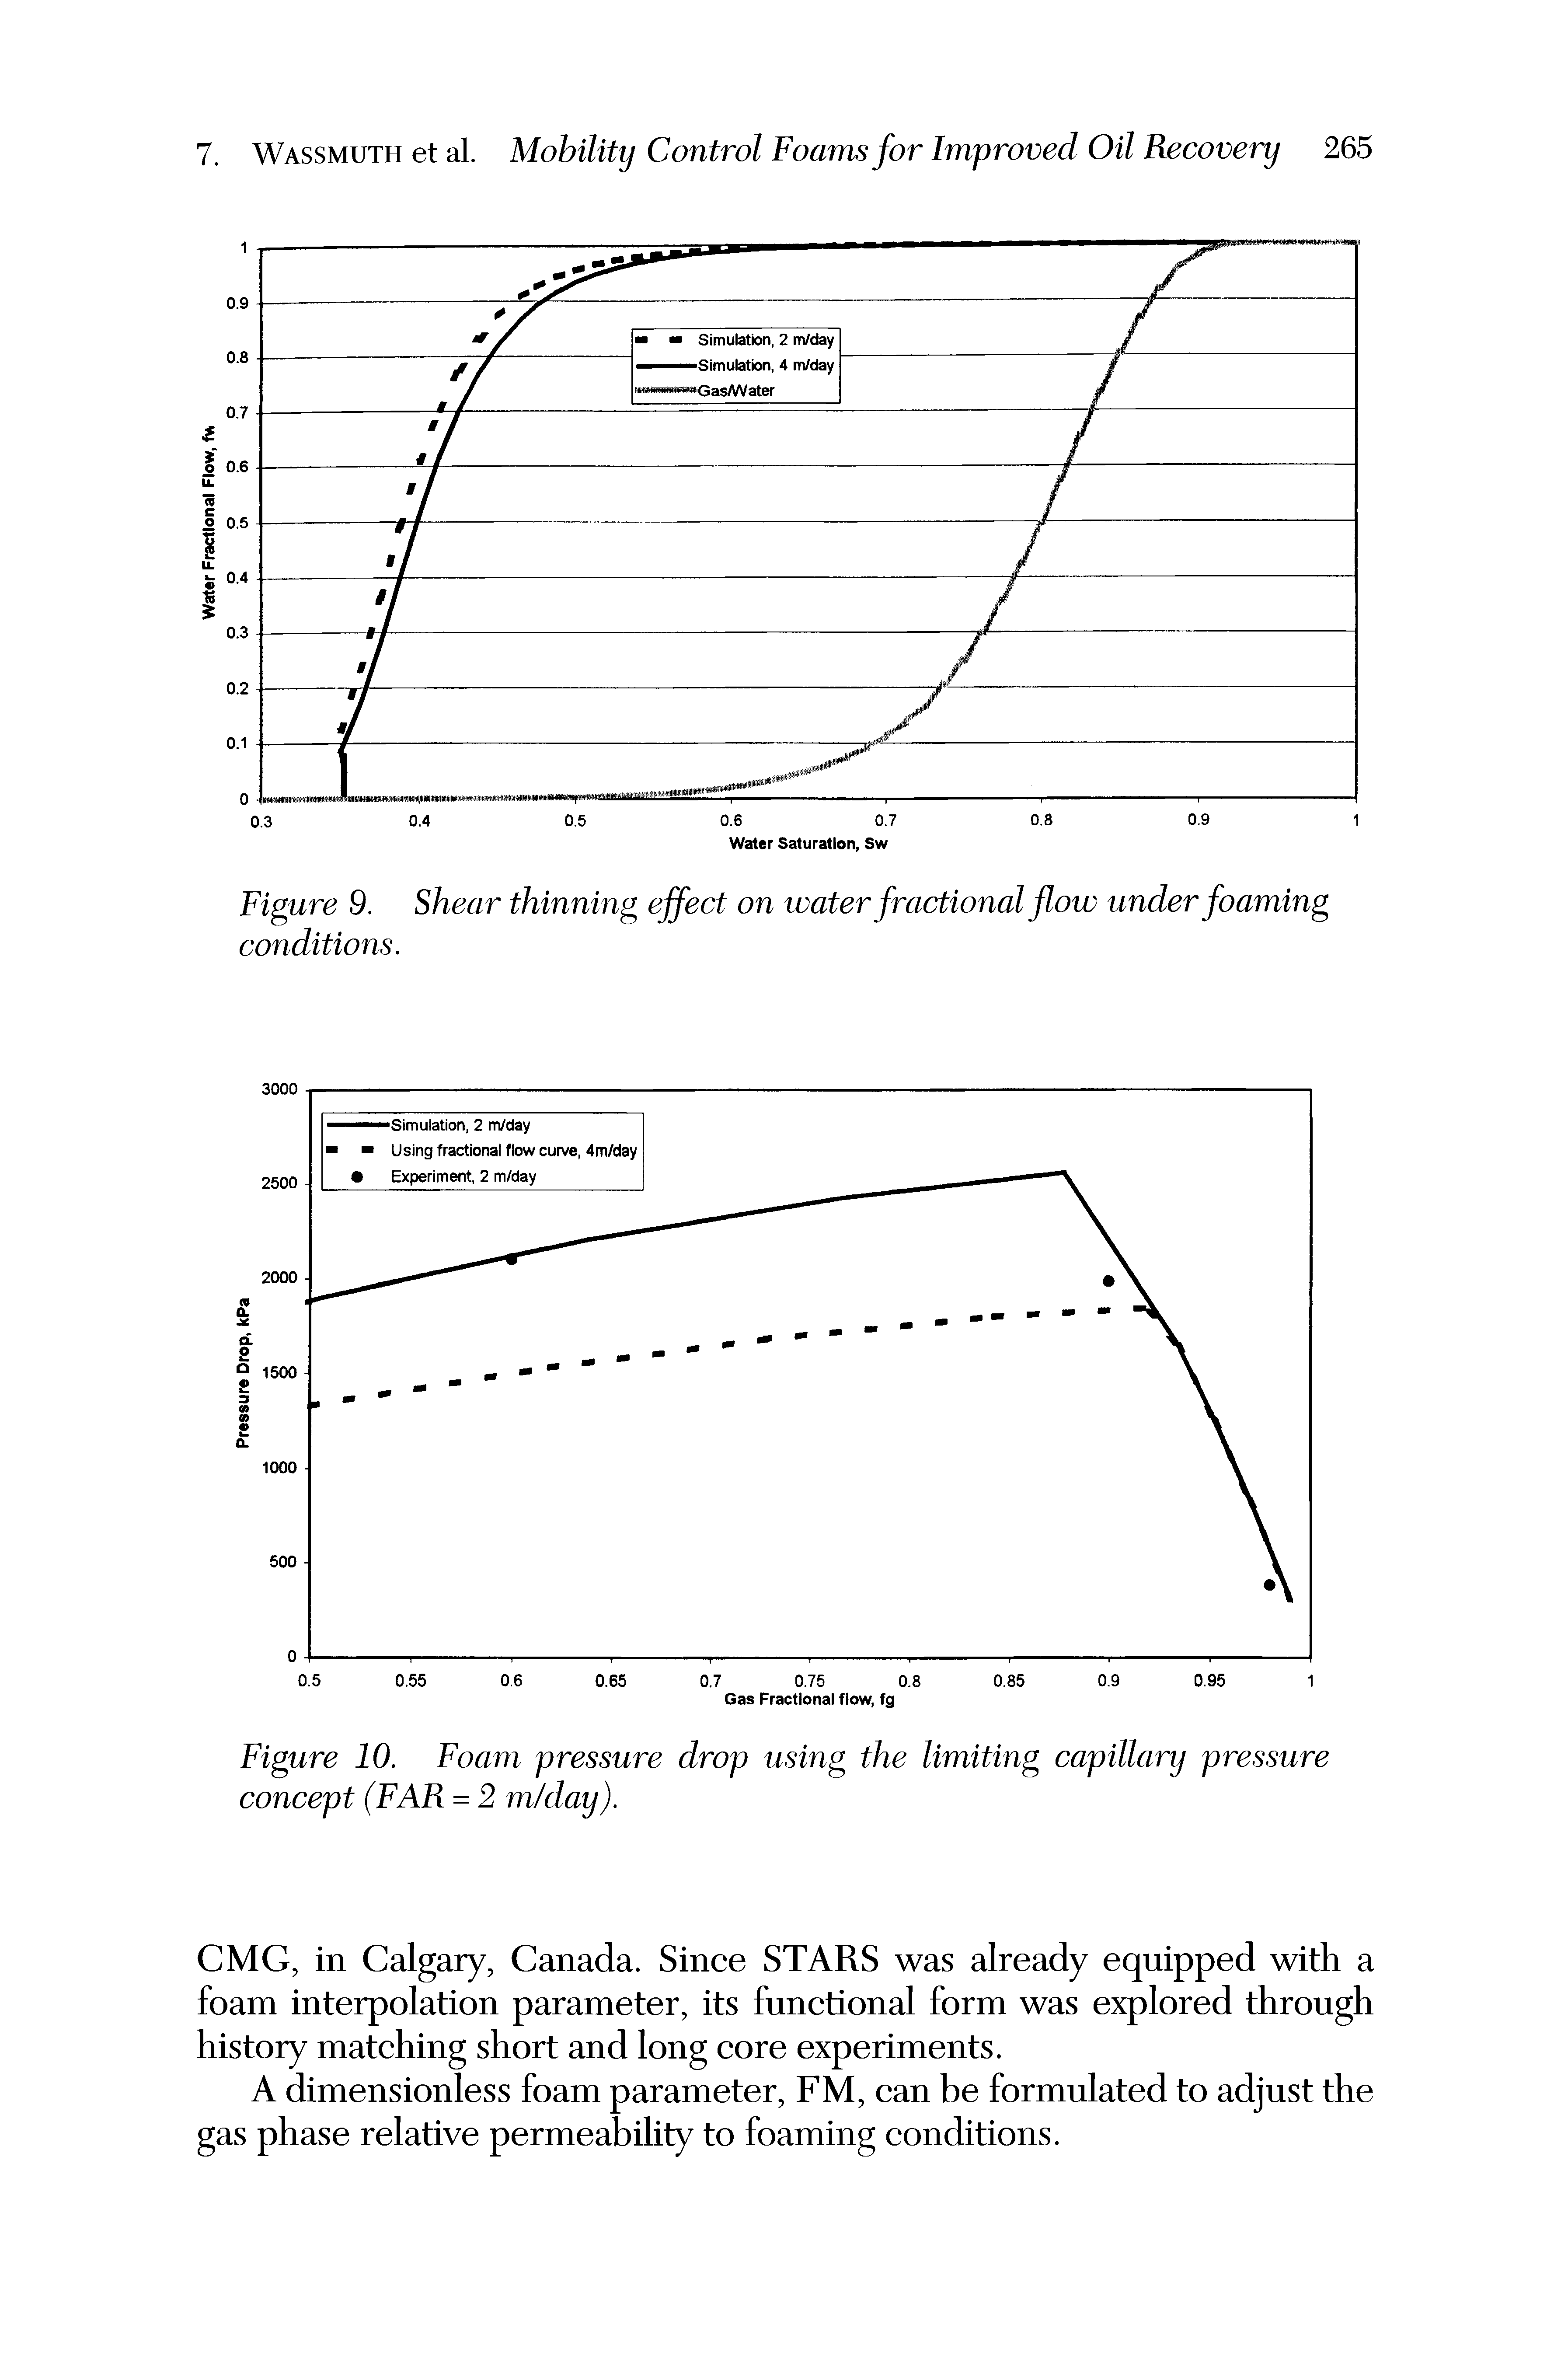 Figure 9. Shear thinning effect on water fractional flow under foaming conditions.